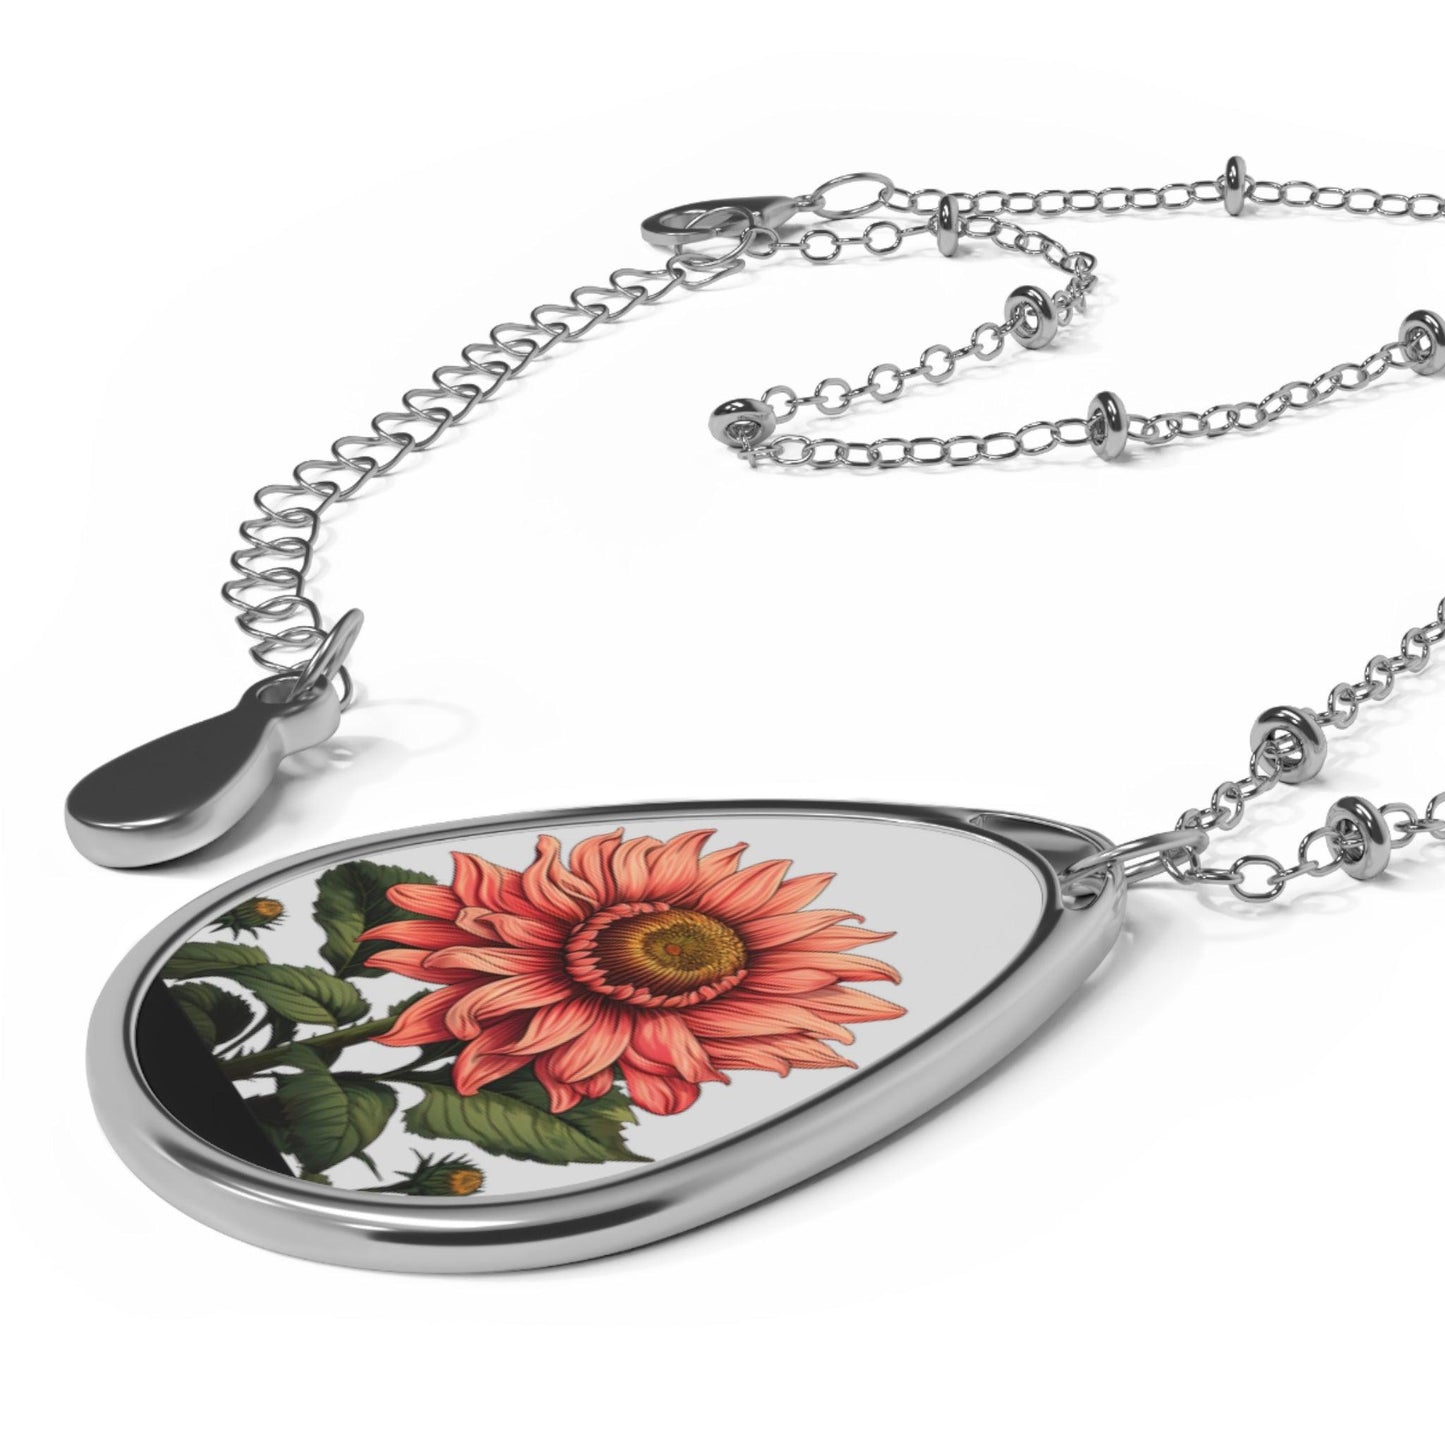 SunFlower Oval Necklace Flower Necklace Pendant- Unique Gift For Her Birthday Christmas Flower Necklace Flower Jewelry Nature Jewelry Floral Jewelry - Giftsmojo